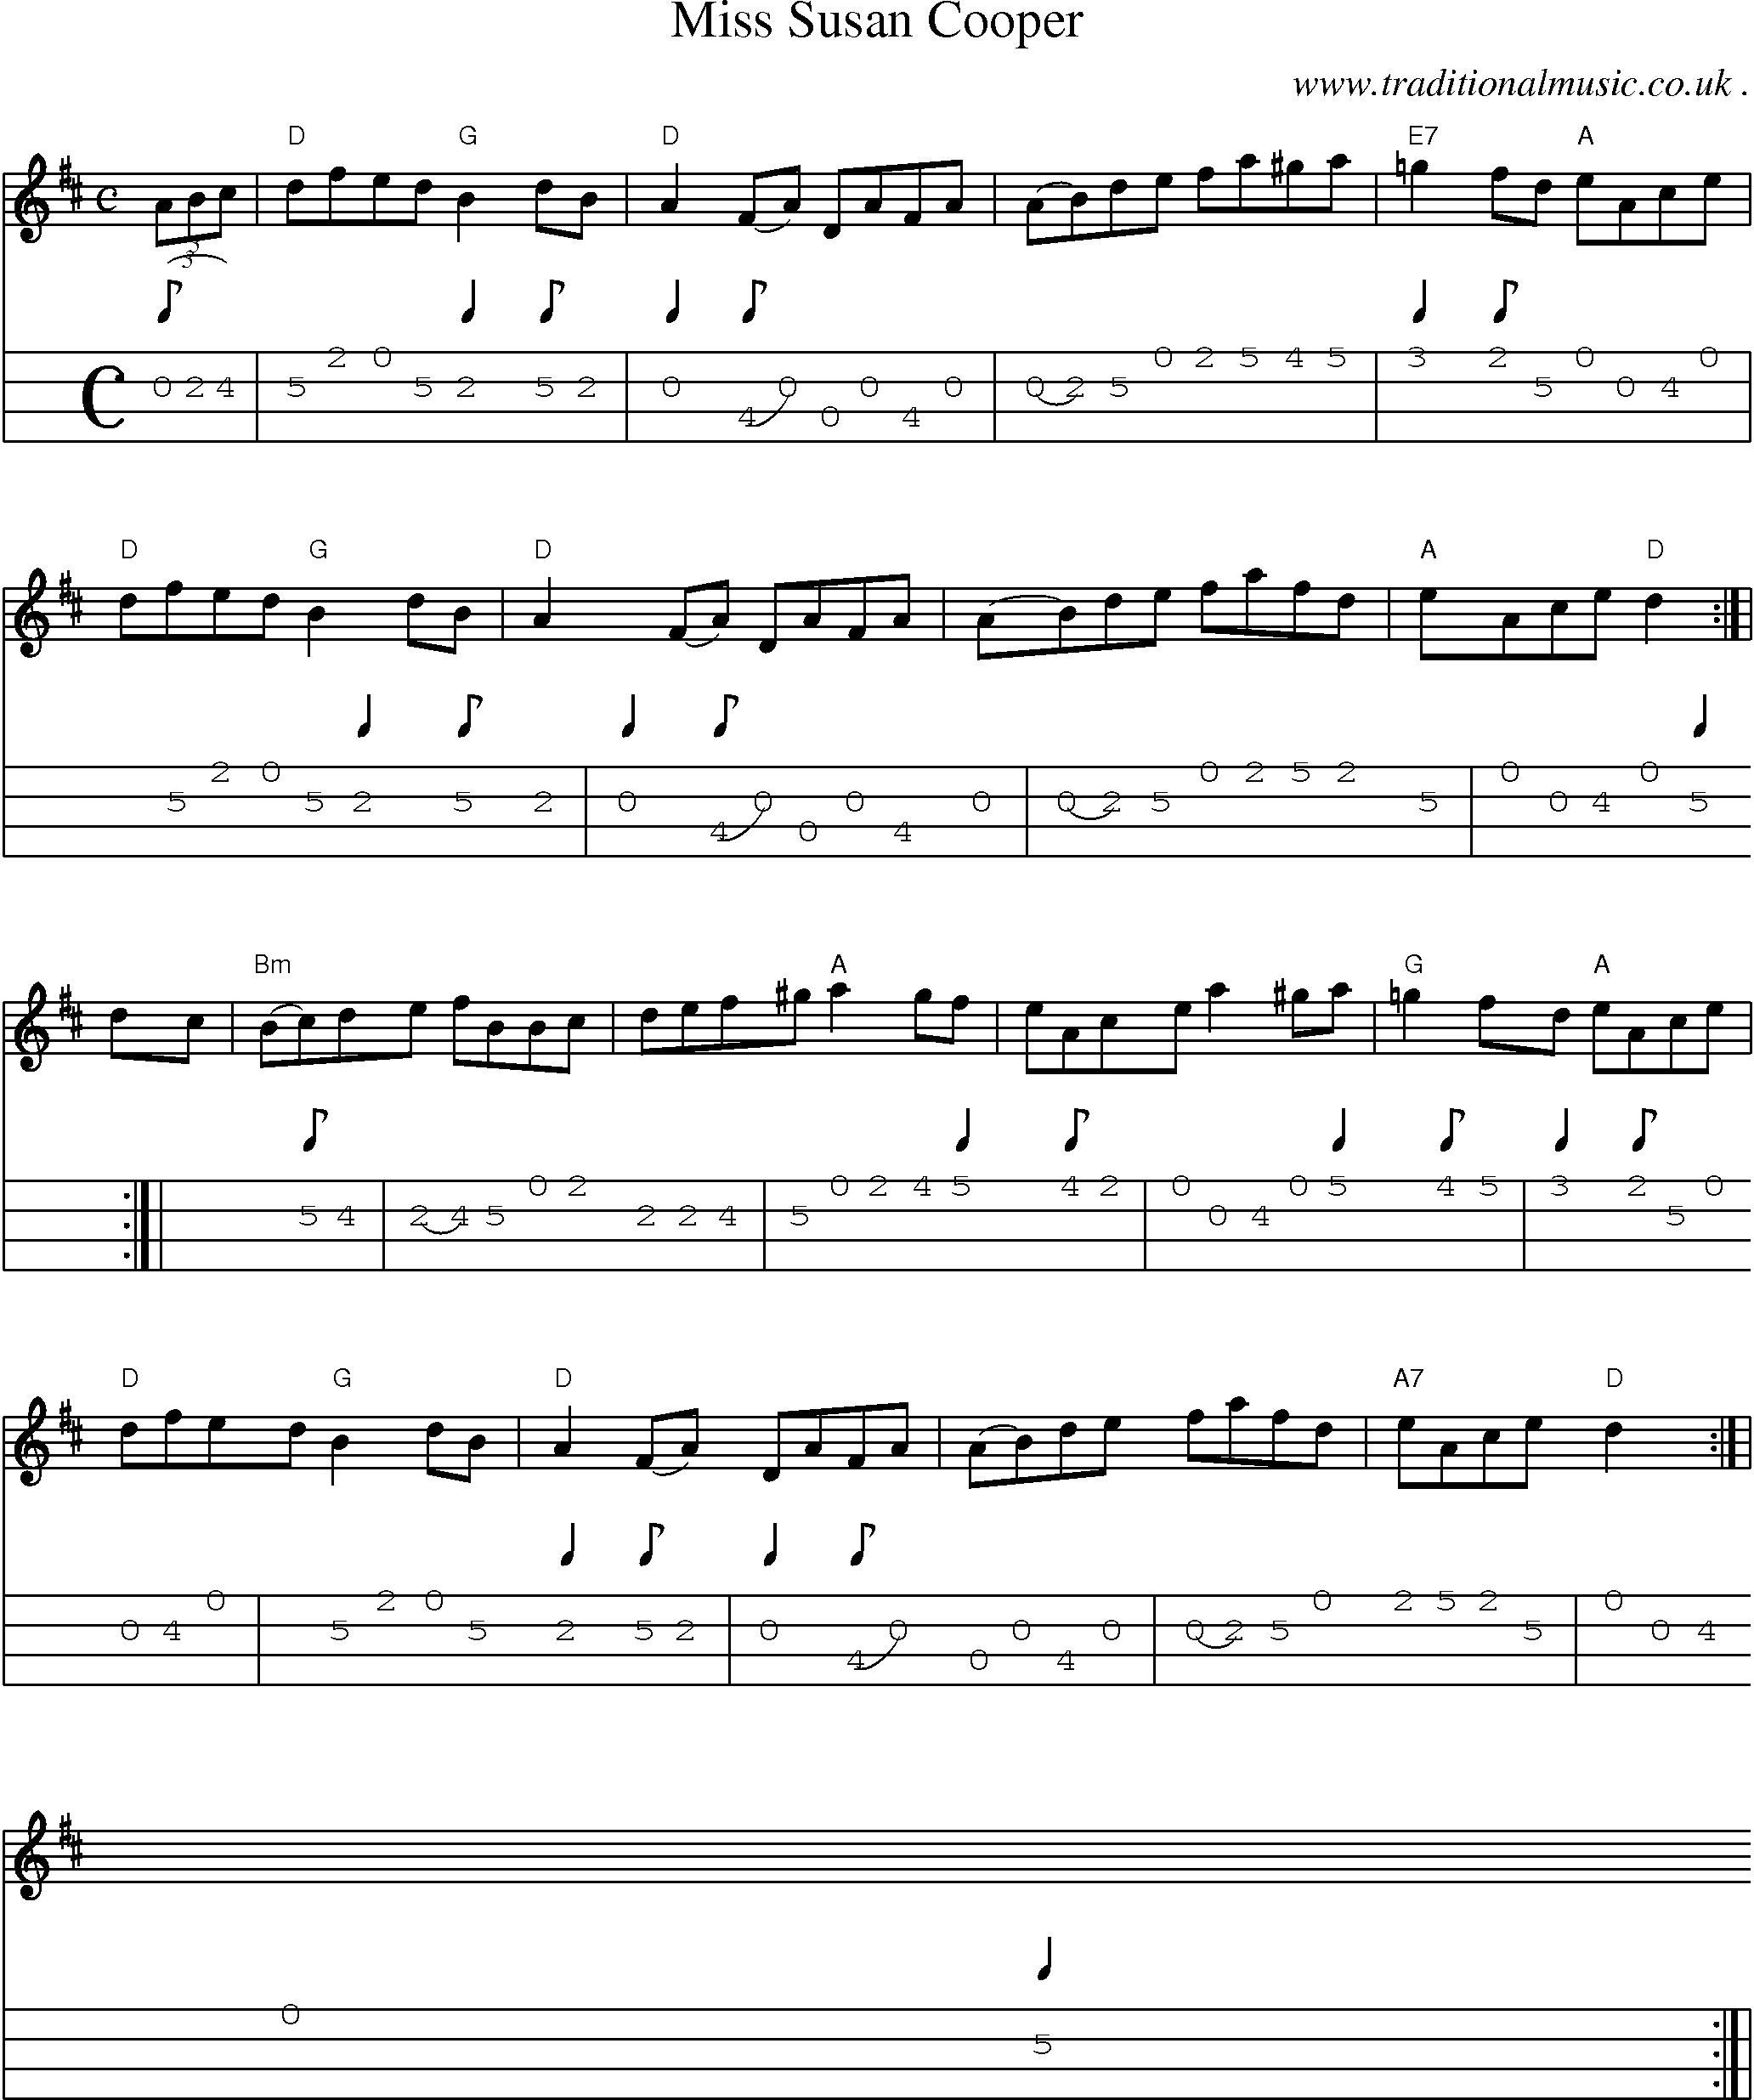 Sheet-music  score, Chords and Mandolin Tabs for Miss Susan Cooper